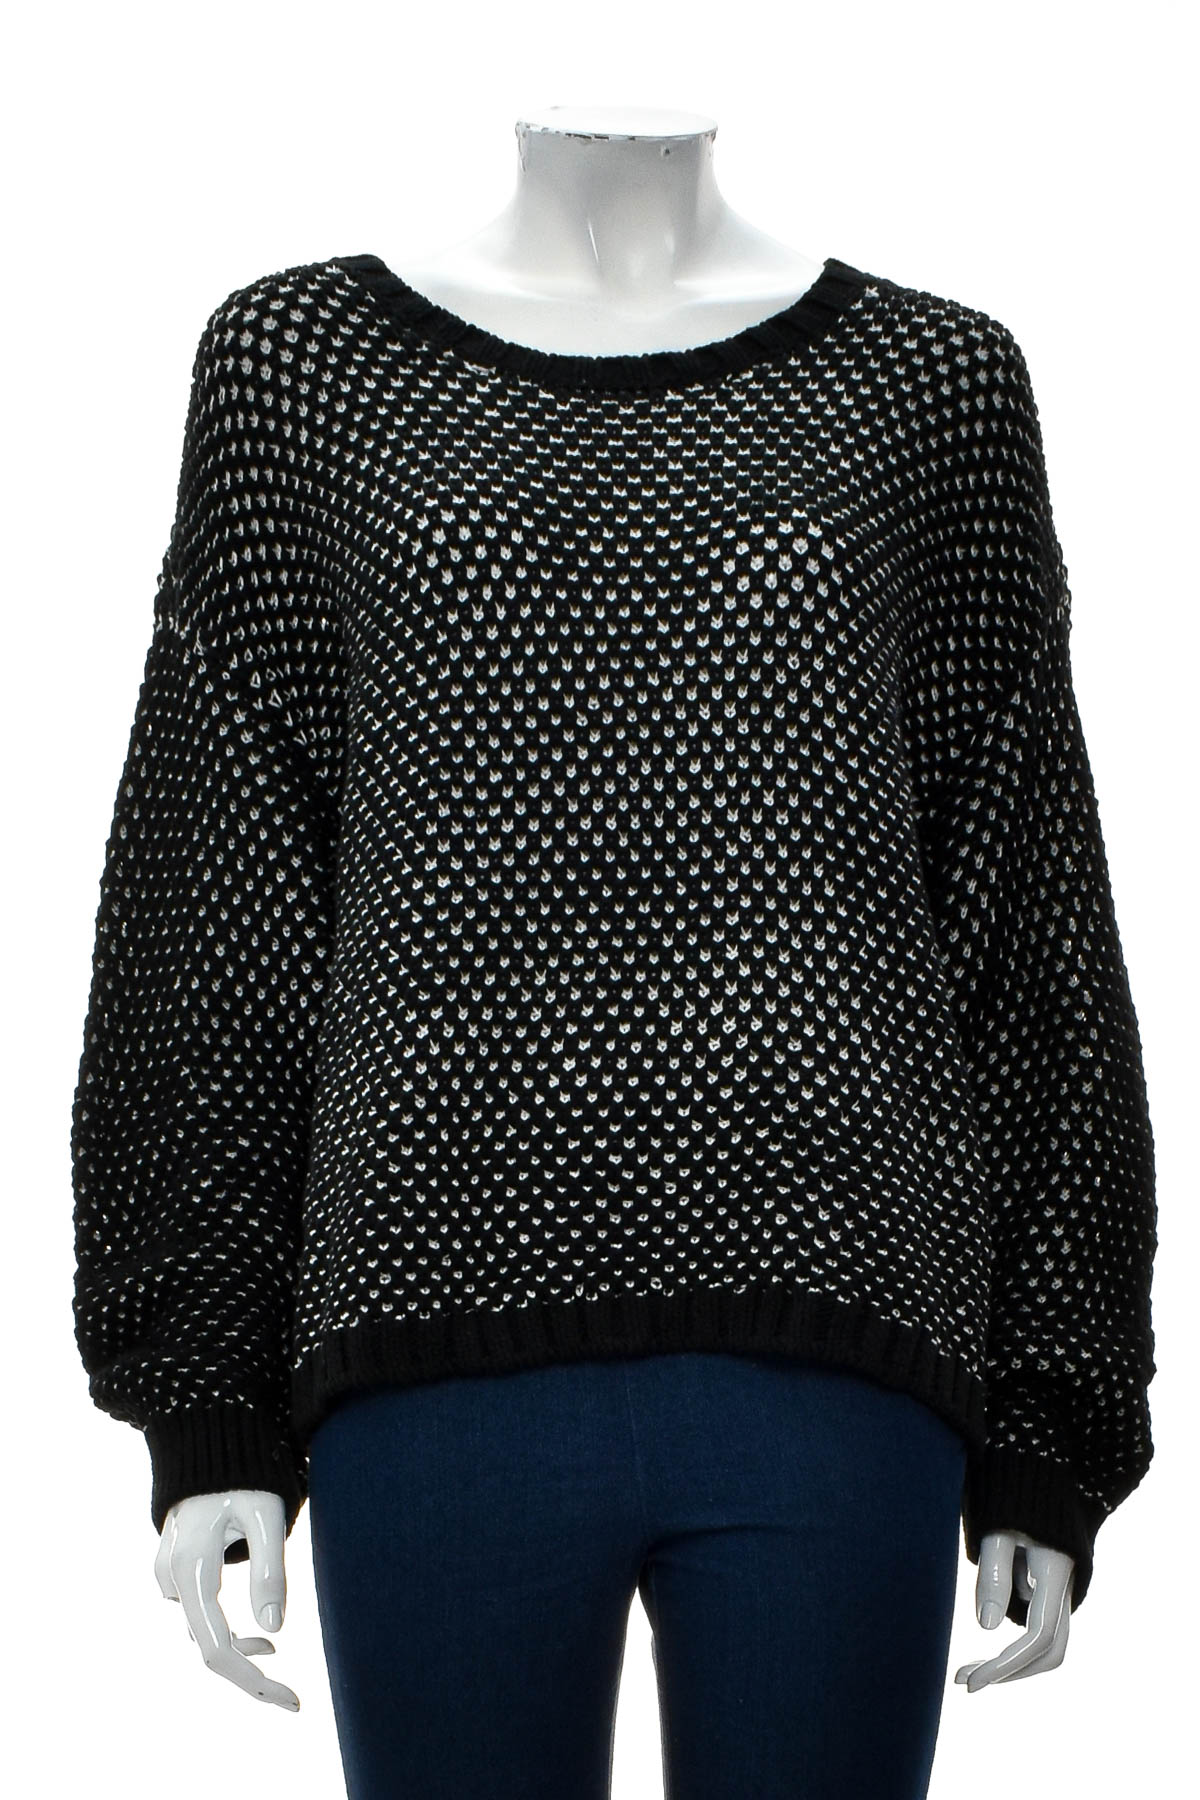 Women's sweater - VINCE CAMUTO - 0